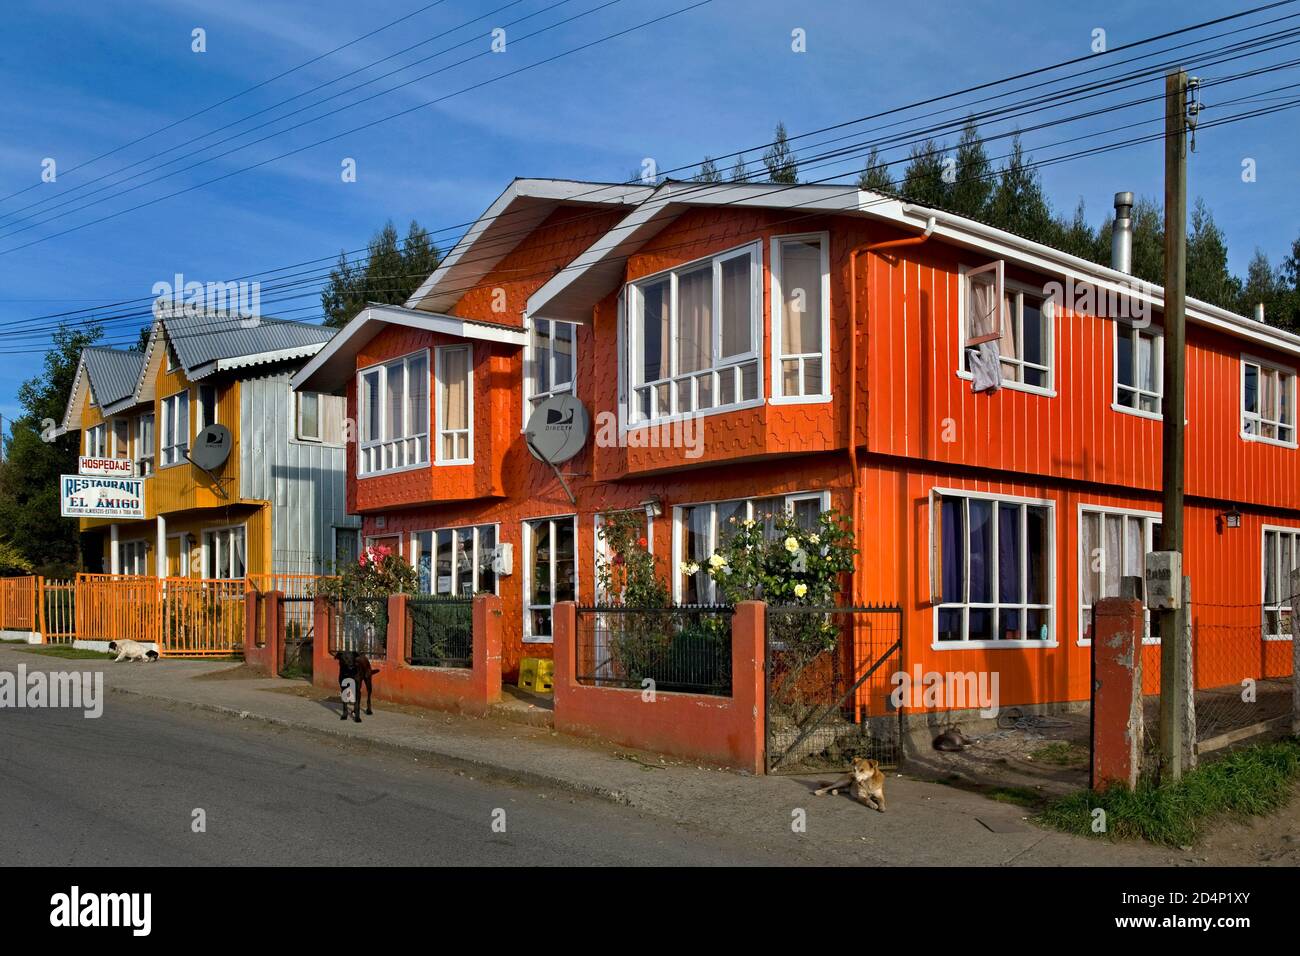 Lemuy Island, Chiloé Archipelago/ Chile - March 24 2014: Colorful houses in Puqueldon Stock Photo